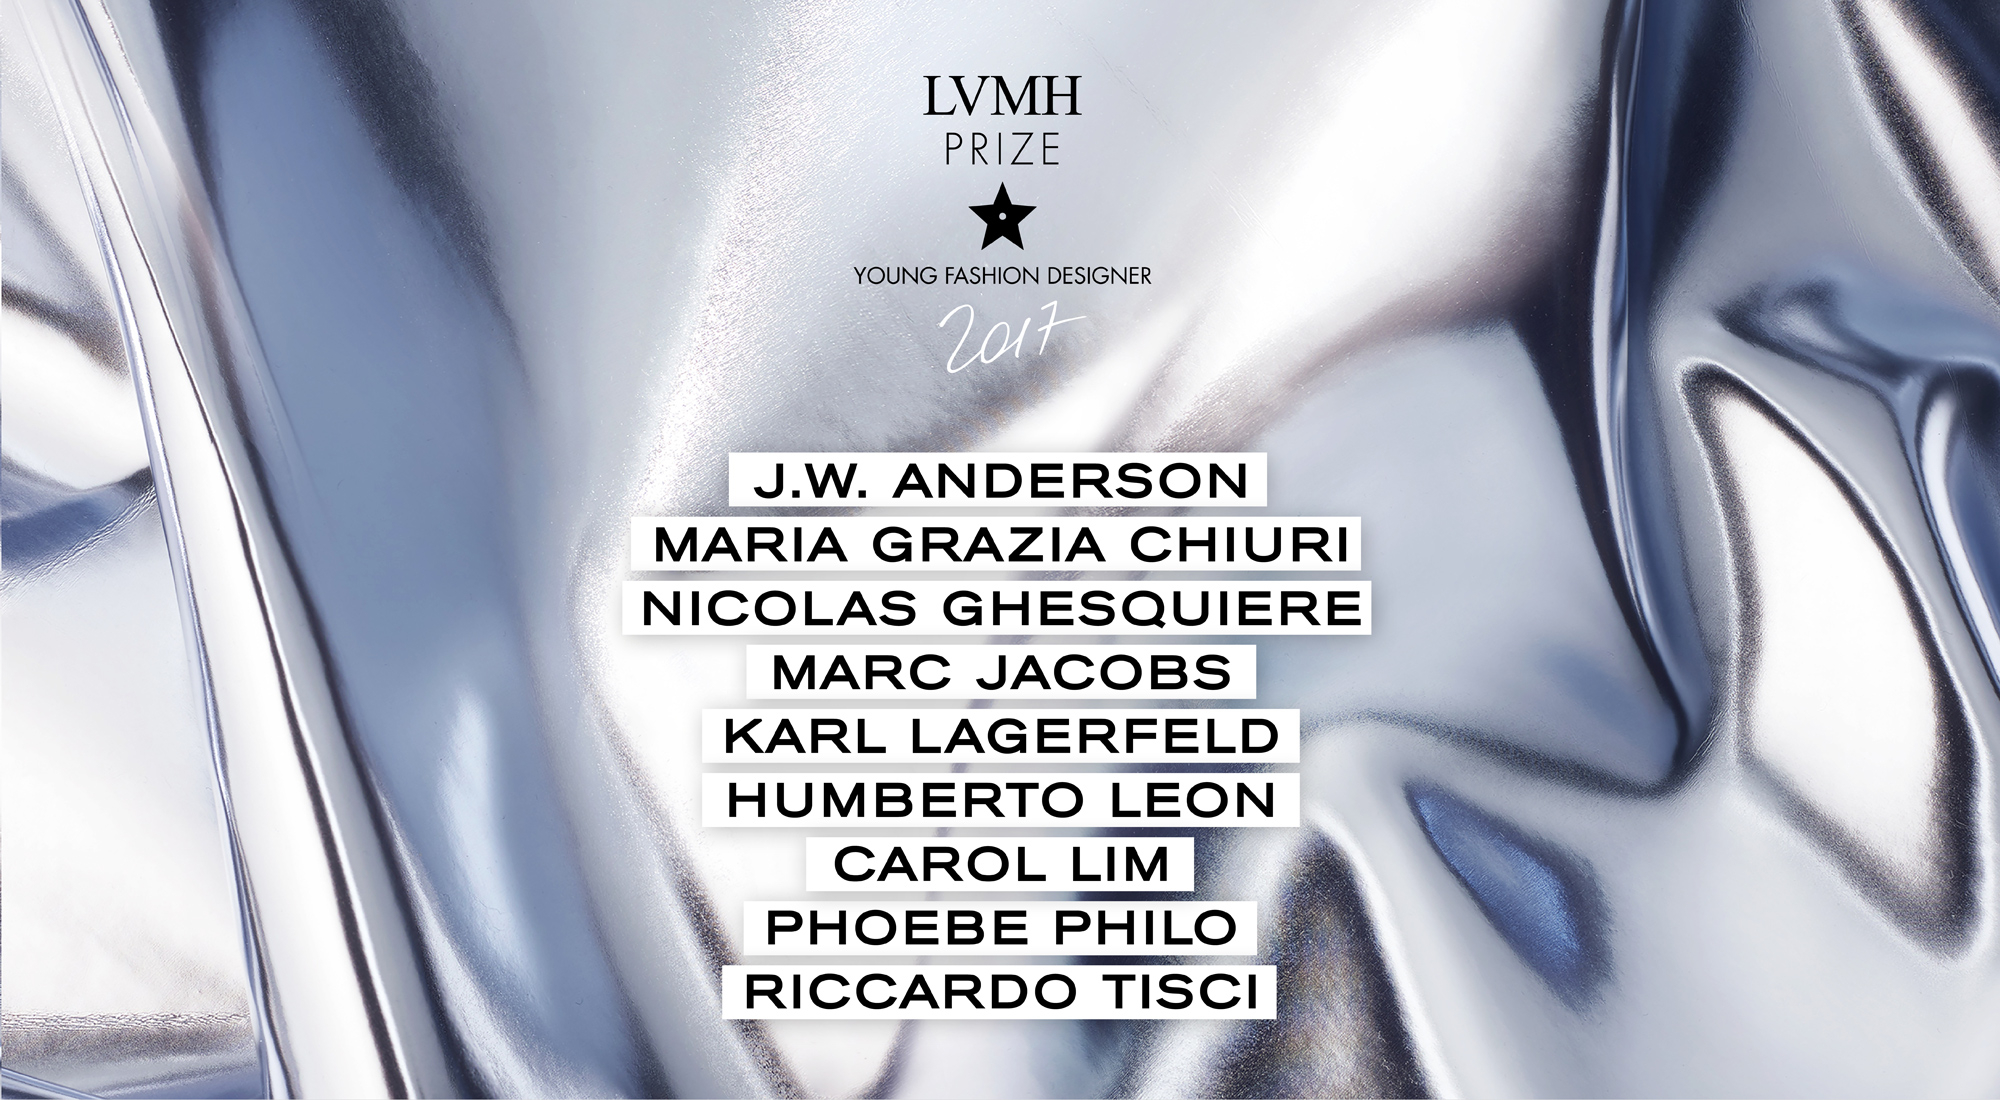 2023 LVMH PRIZE FOR YOUNG FASHION DESIGNERS, 10TH EDITION: The